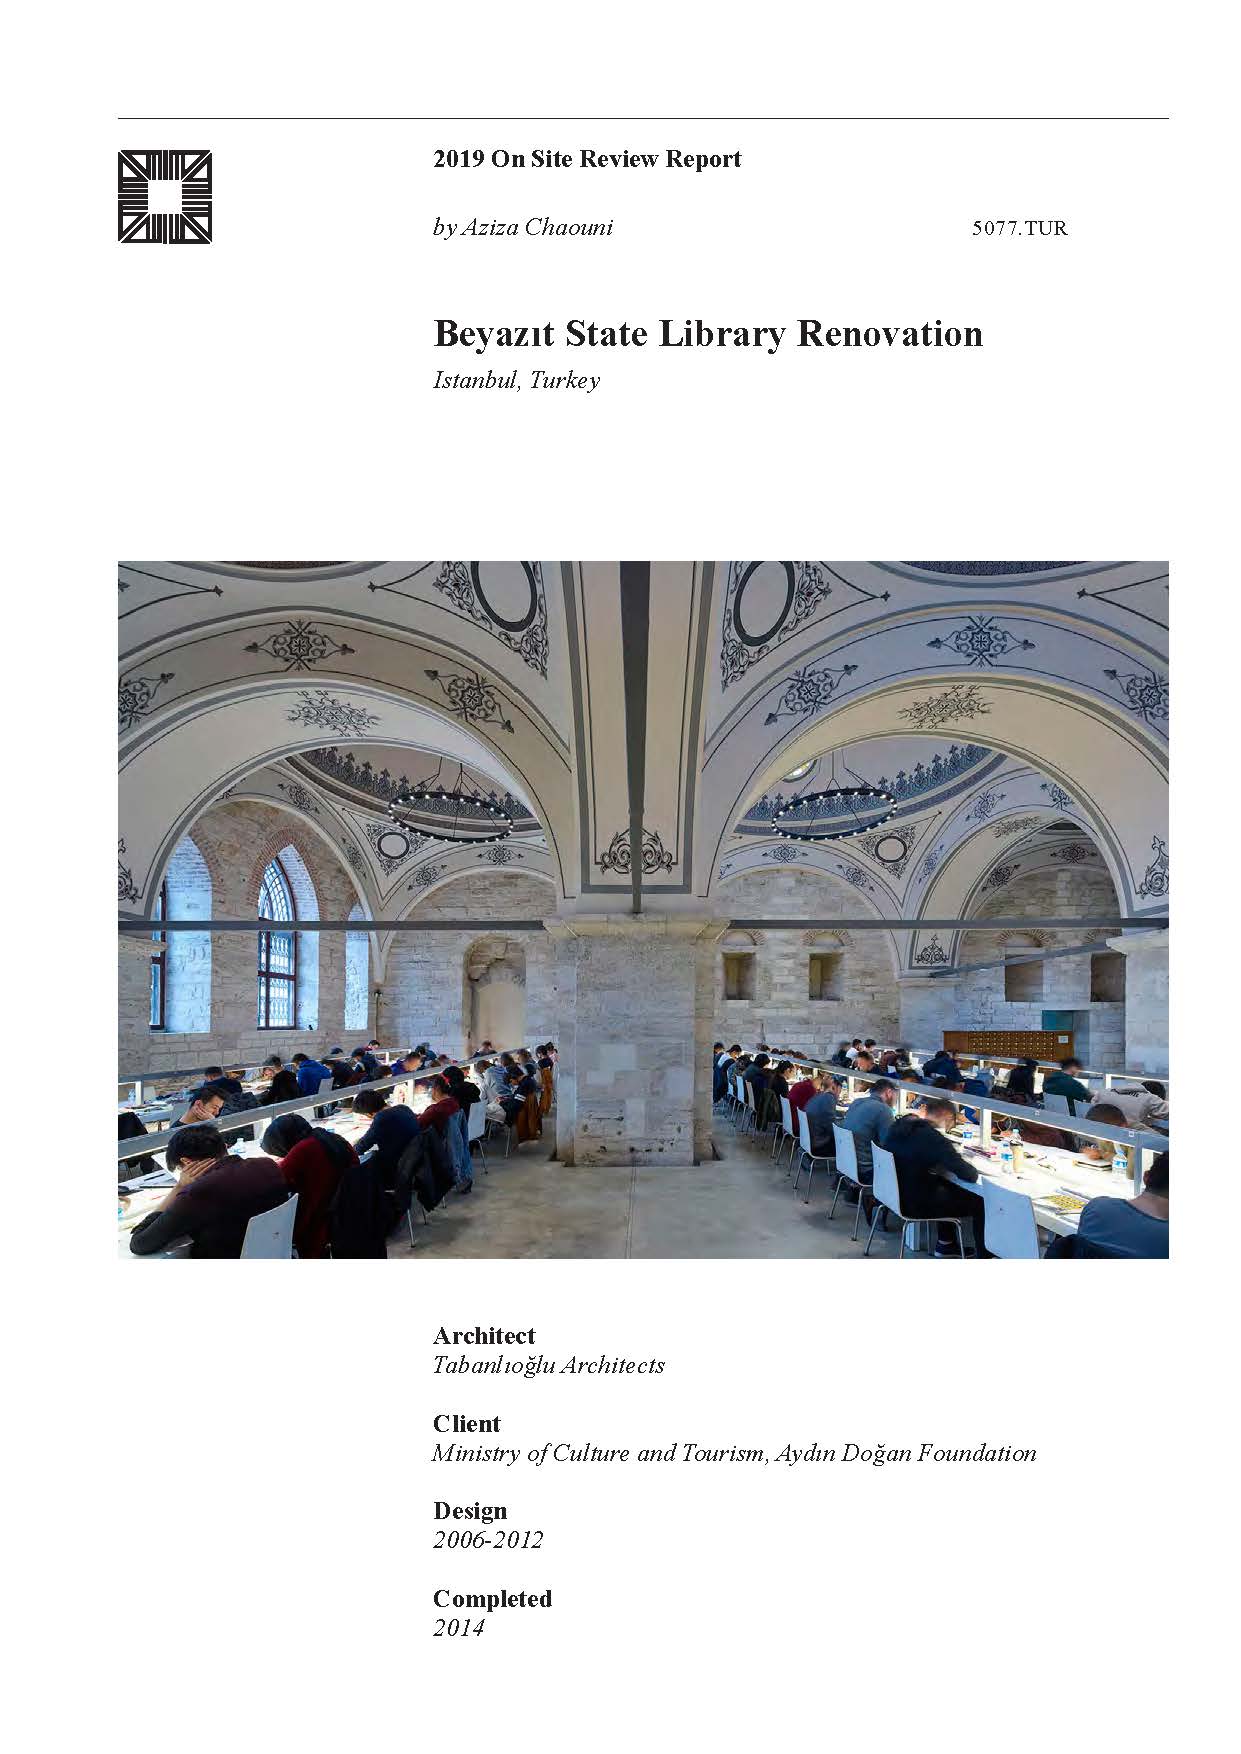 Beyazıt State Library Renovation On-site Review Report